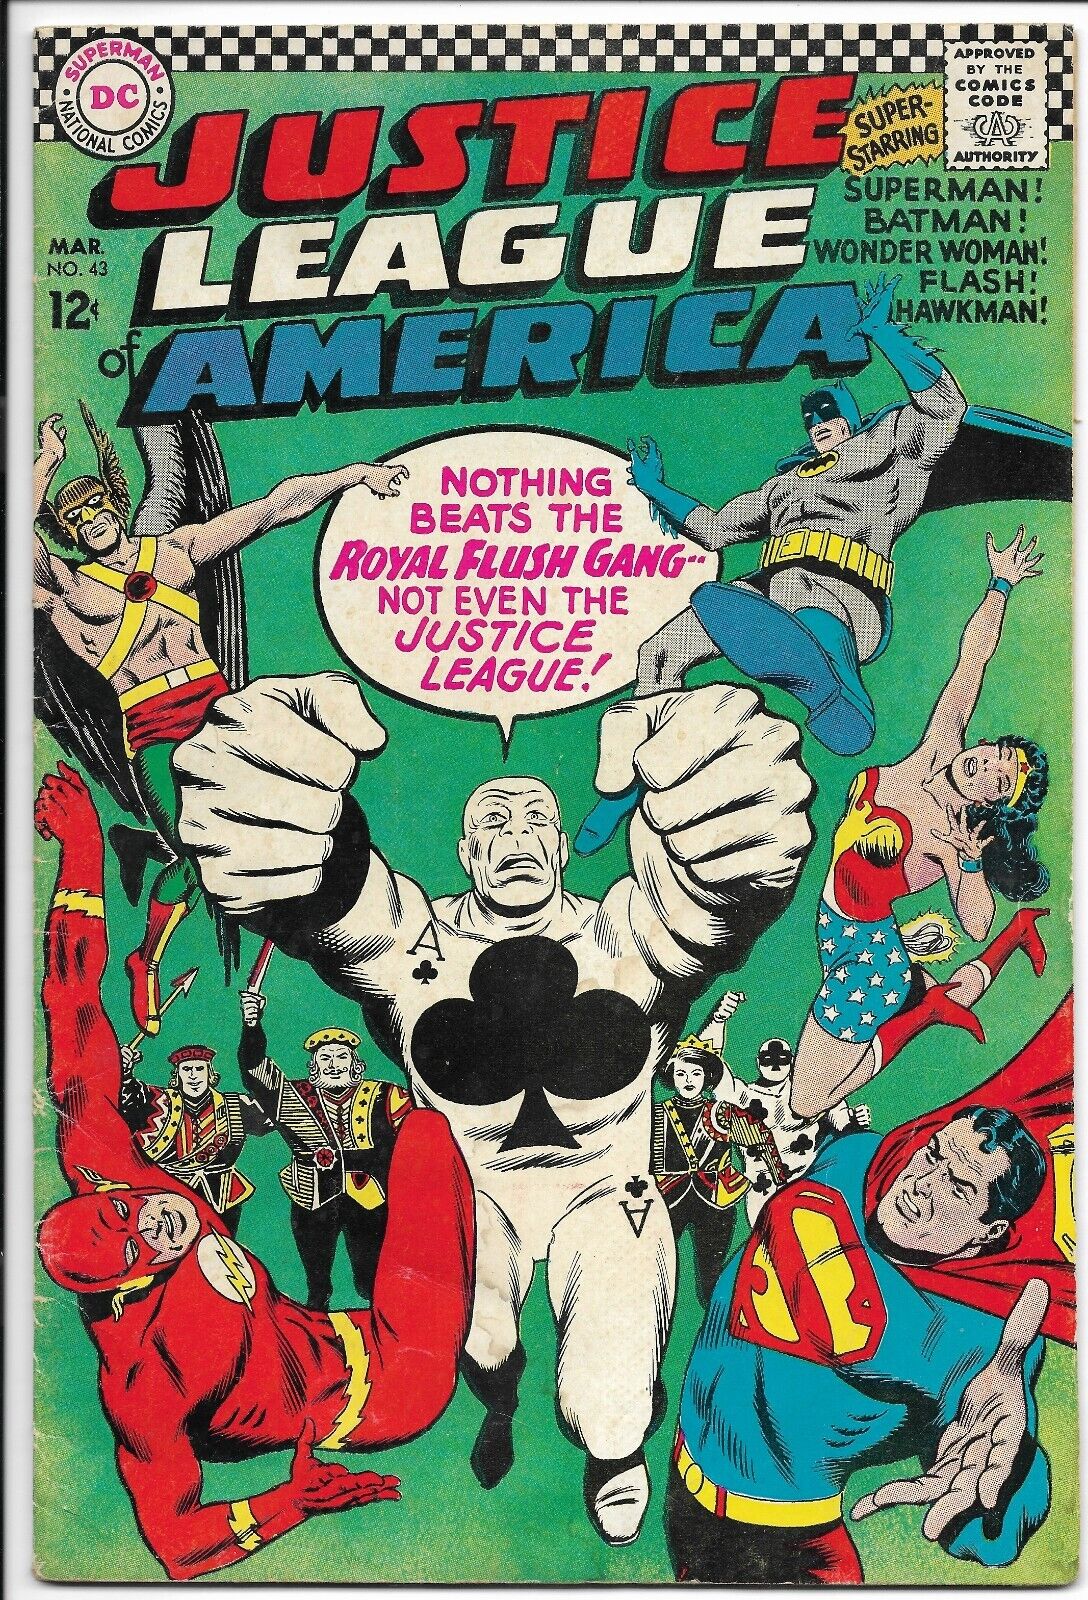 JUSTICE LEAGUE OF AMERICA #43 VG 1st Appearance Royal Flush Gang KEY ISSUE